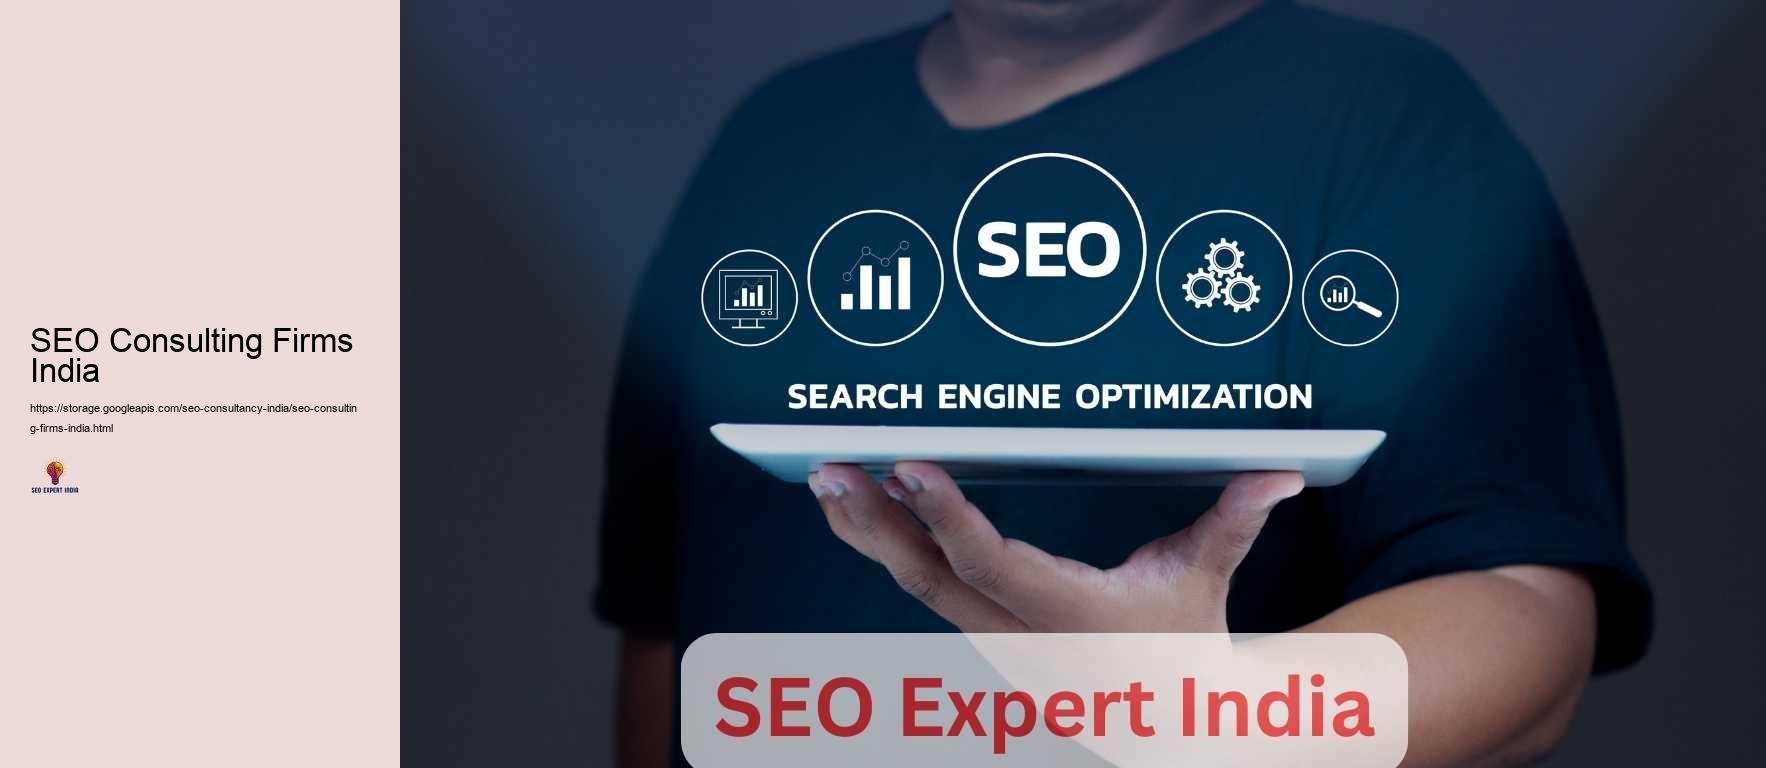 SEO Consulting Firms India